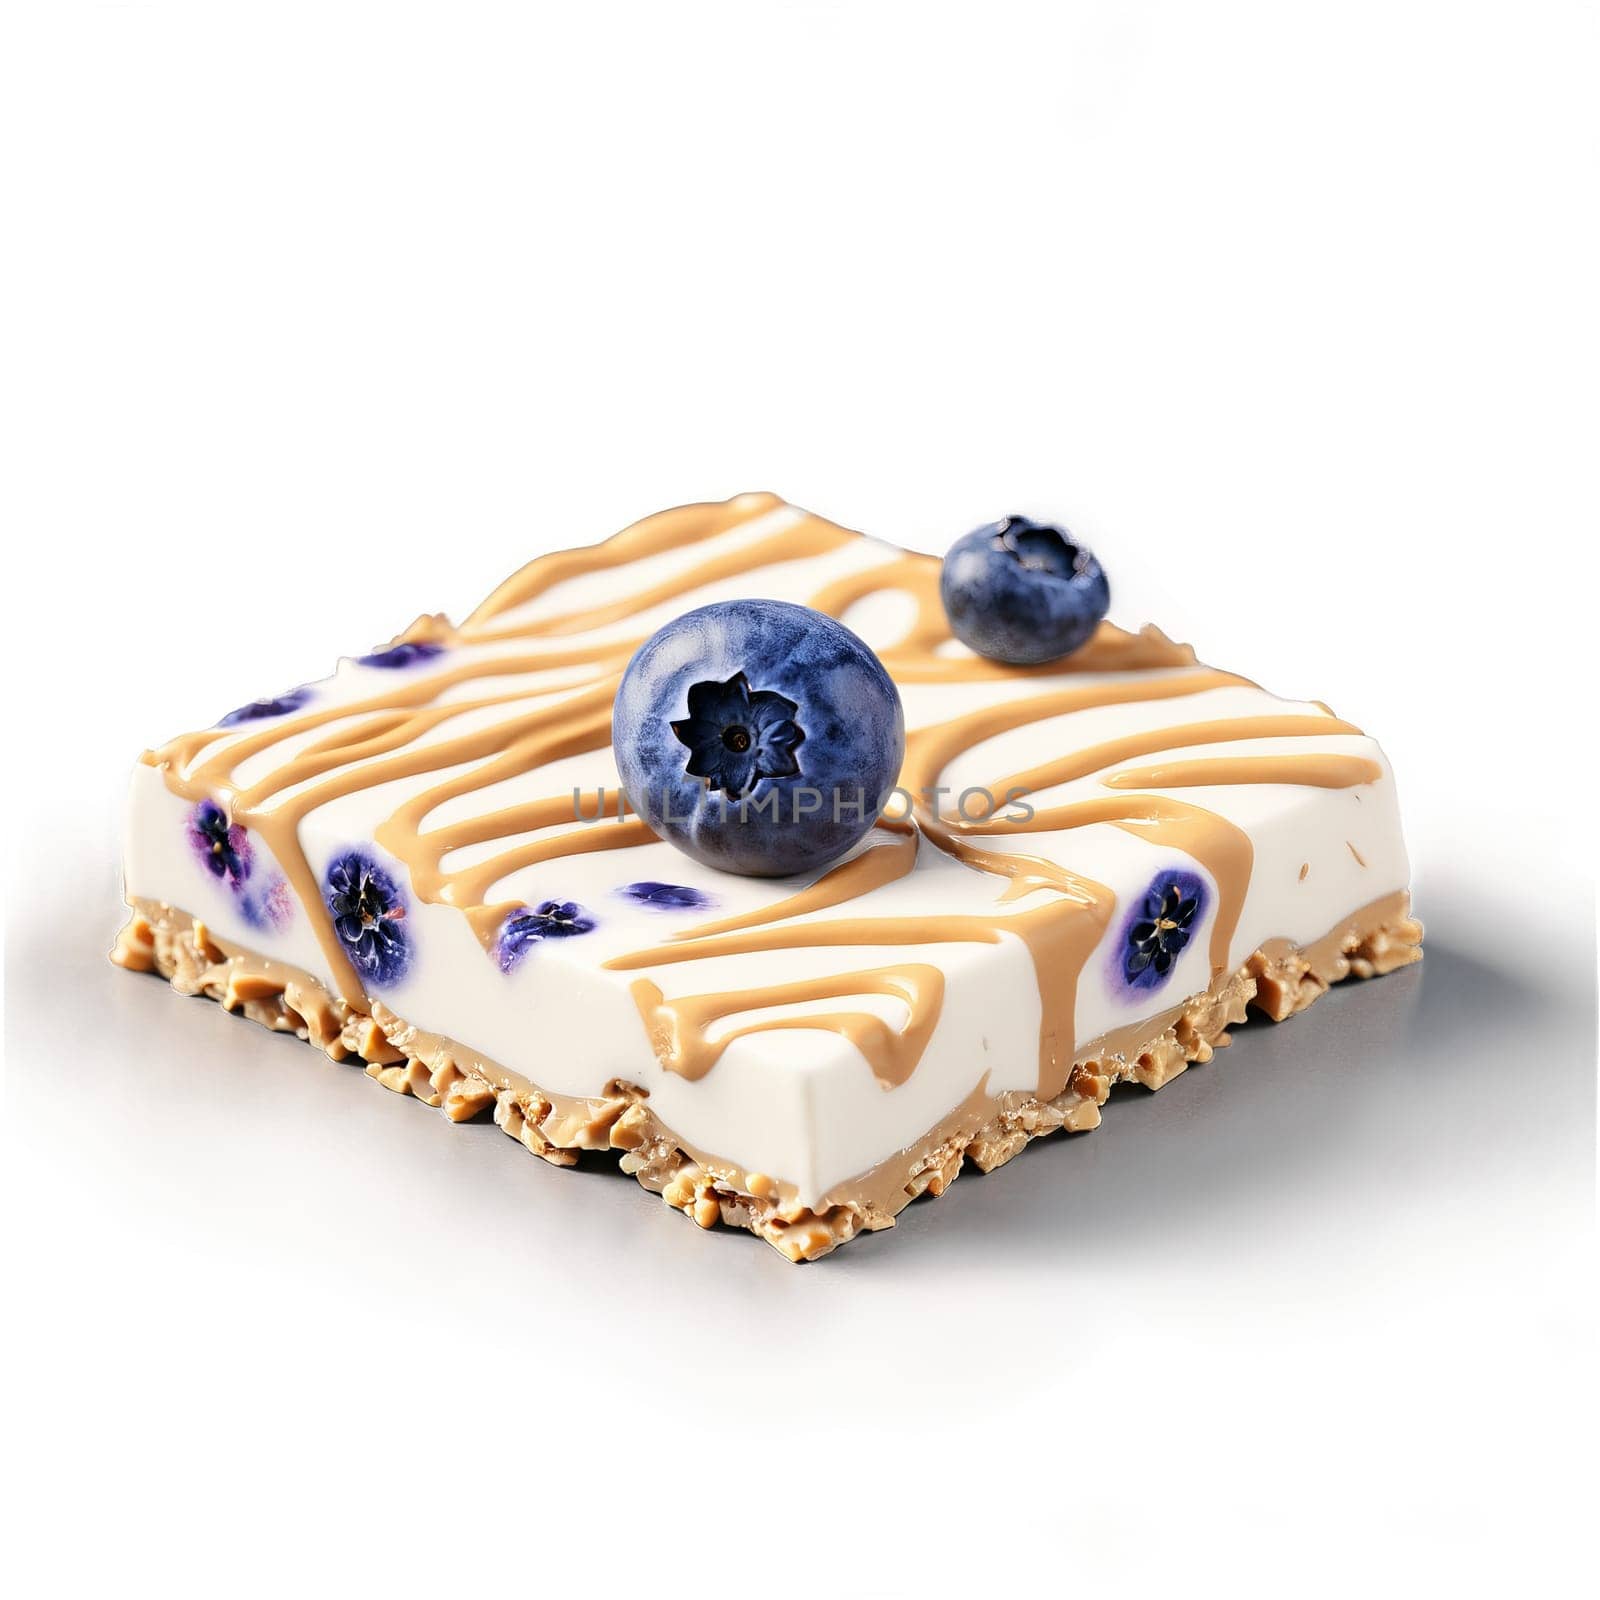 Breakfast yogurt bark with Greek yogurt swirled with peanut butter and dotted with fresh blueberries by panophotograph